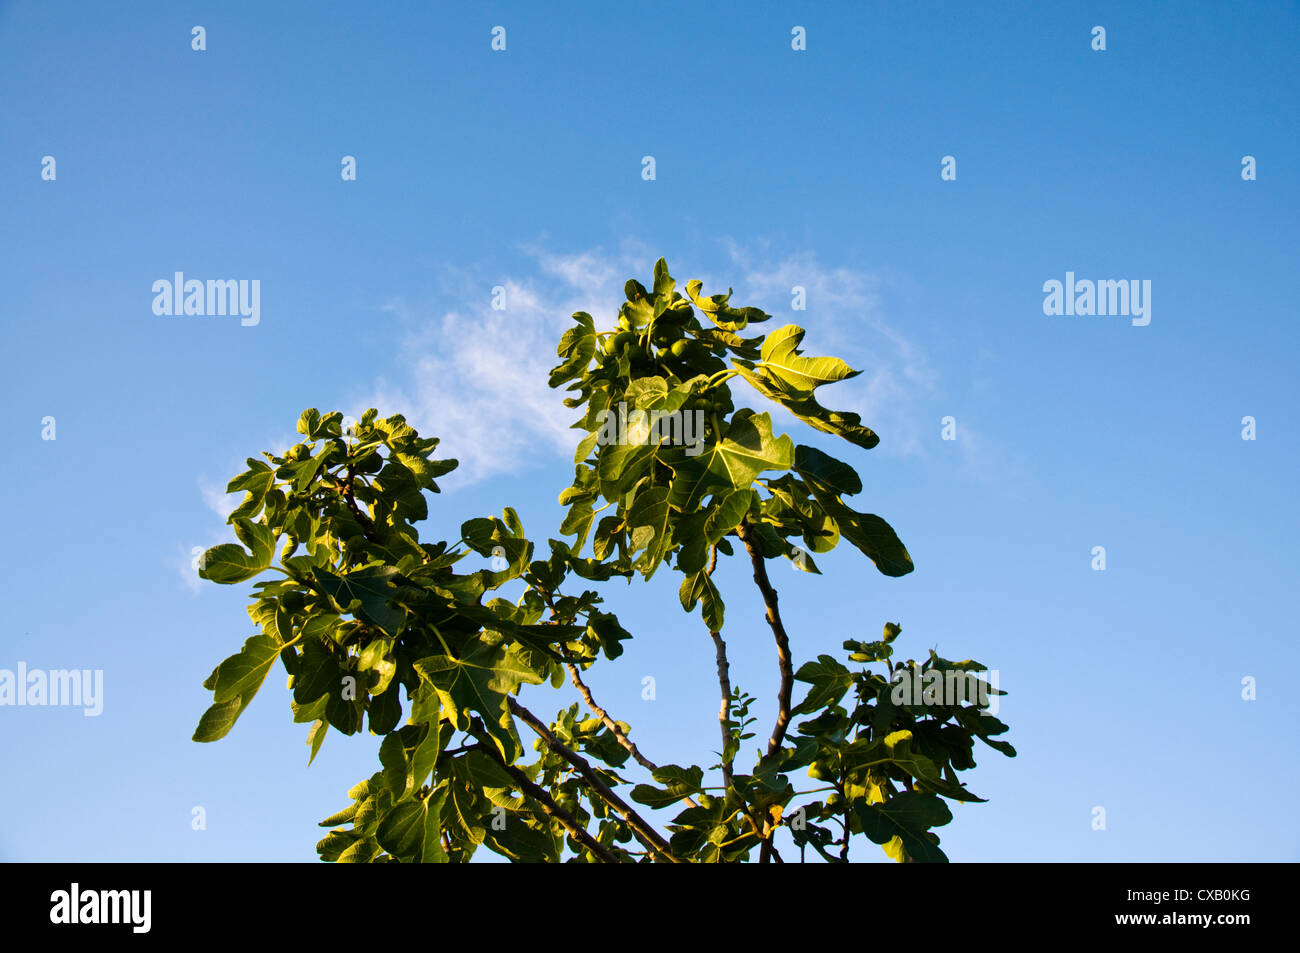 Figs growing on a tree Stock Photo